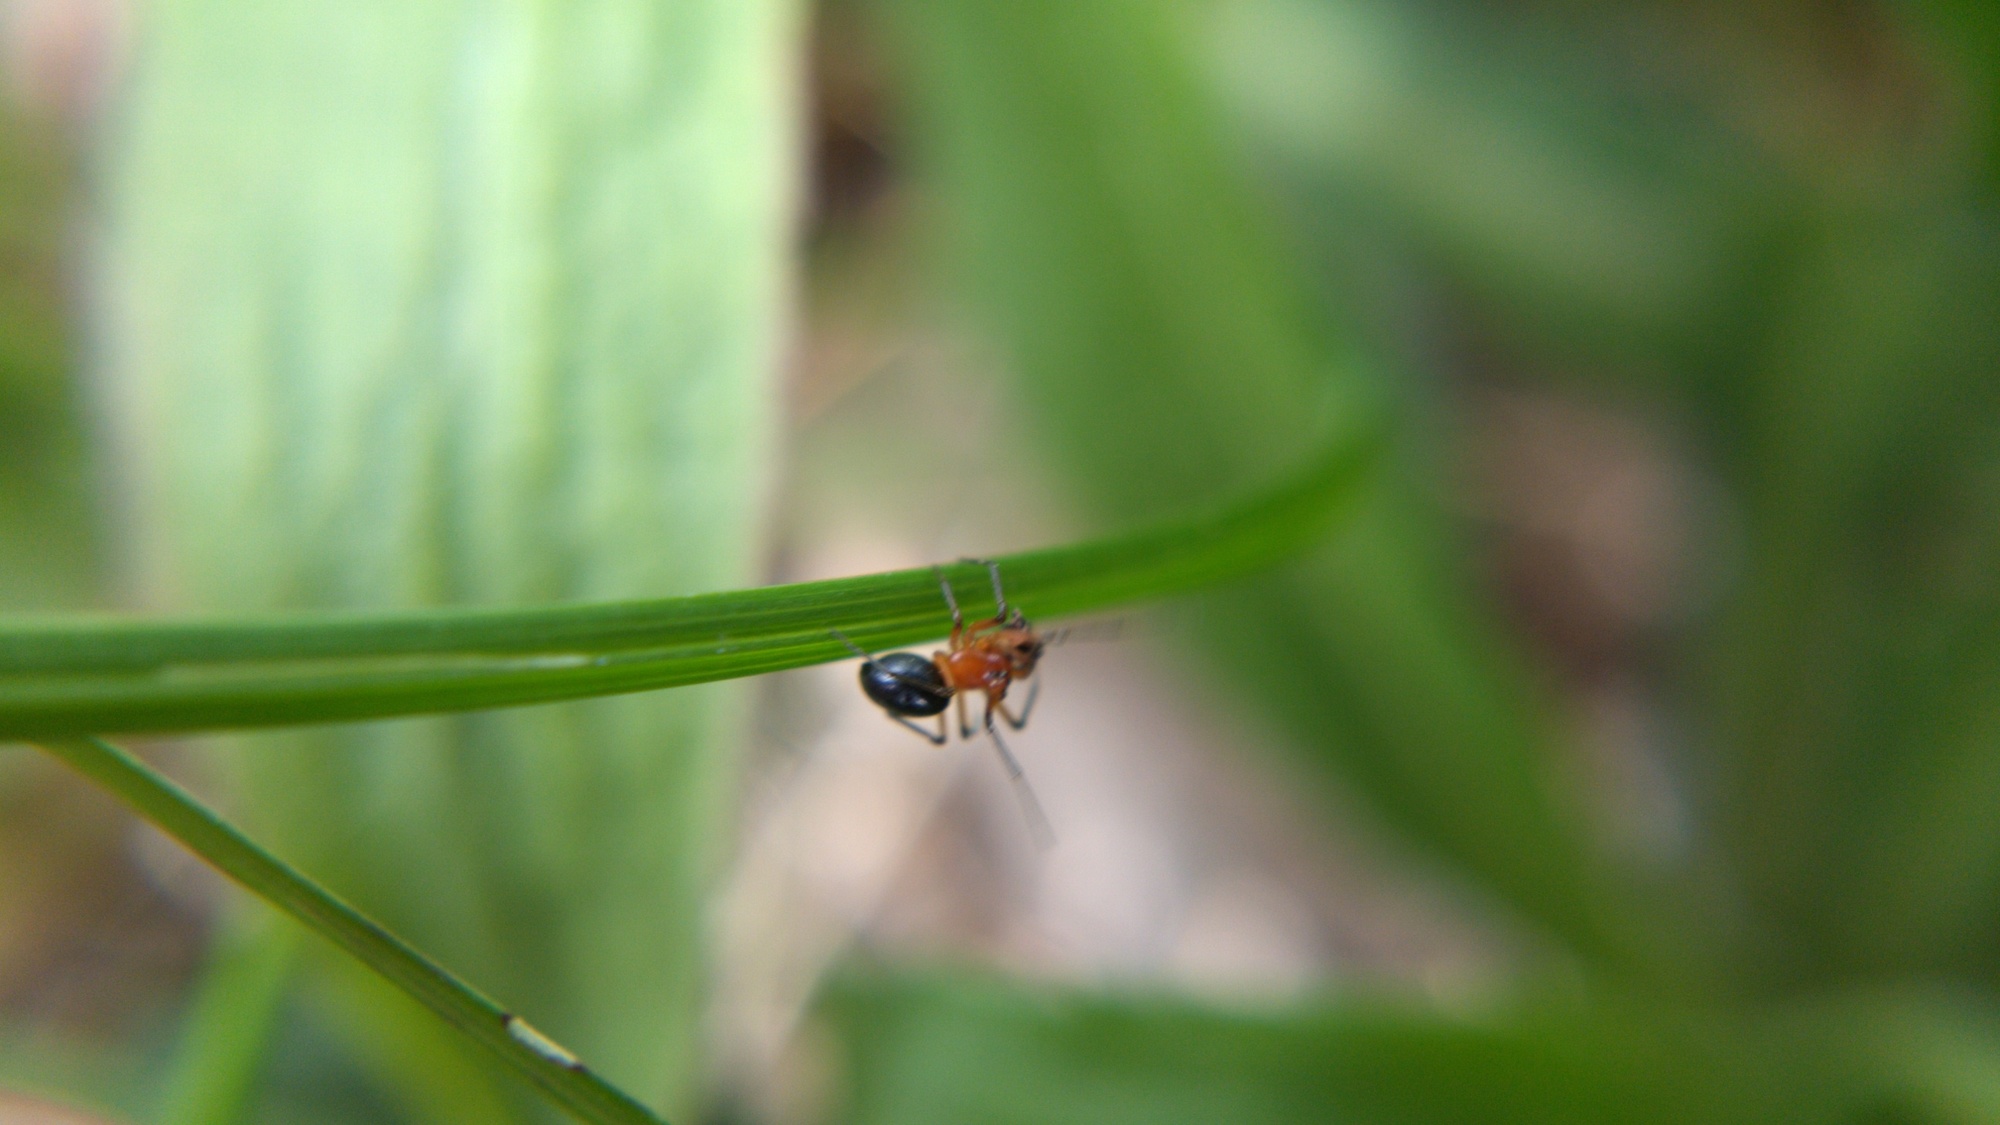 Blurry macro shot of H. florens on a blade of grass